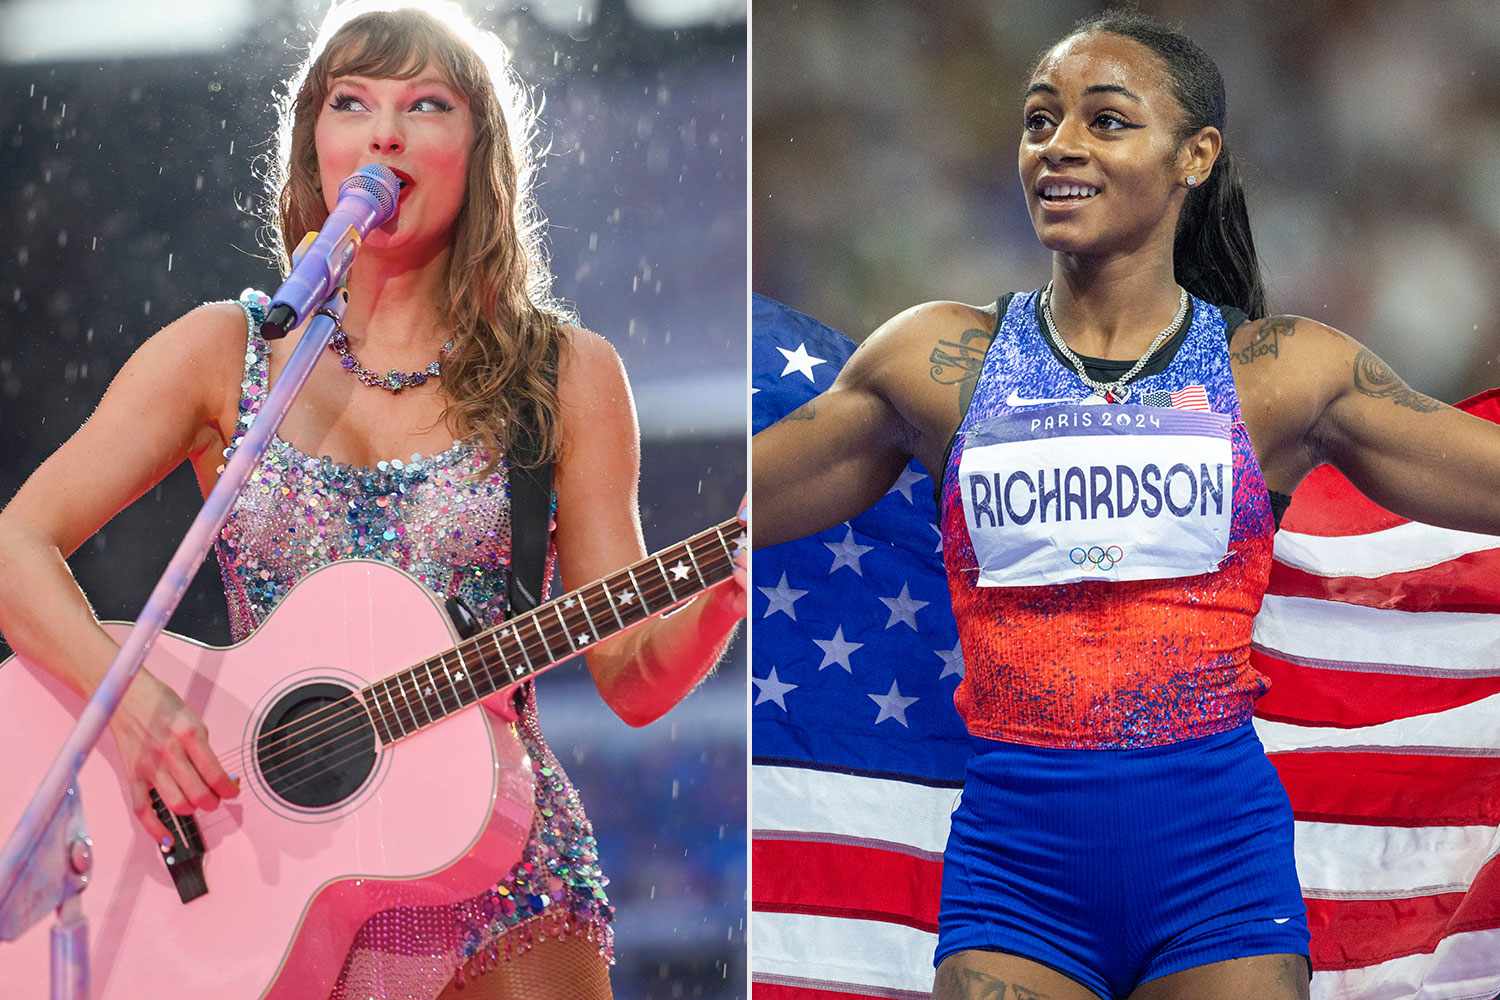 Taylor Swift pays tribute to Olympic standouts Simone Biles, Katie Ledecky, and Sha'Carri Richardson